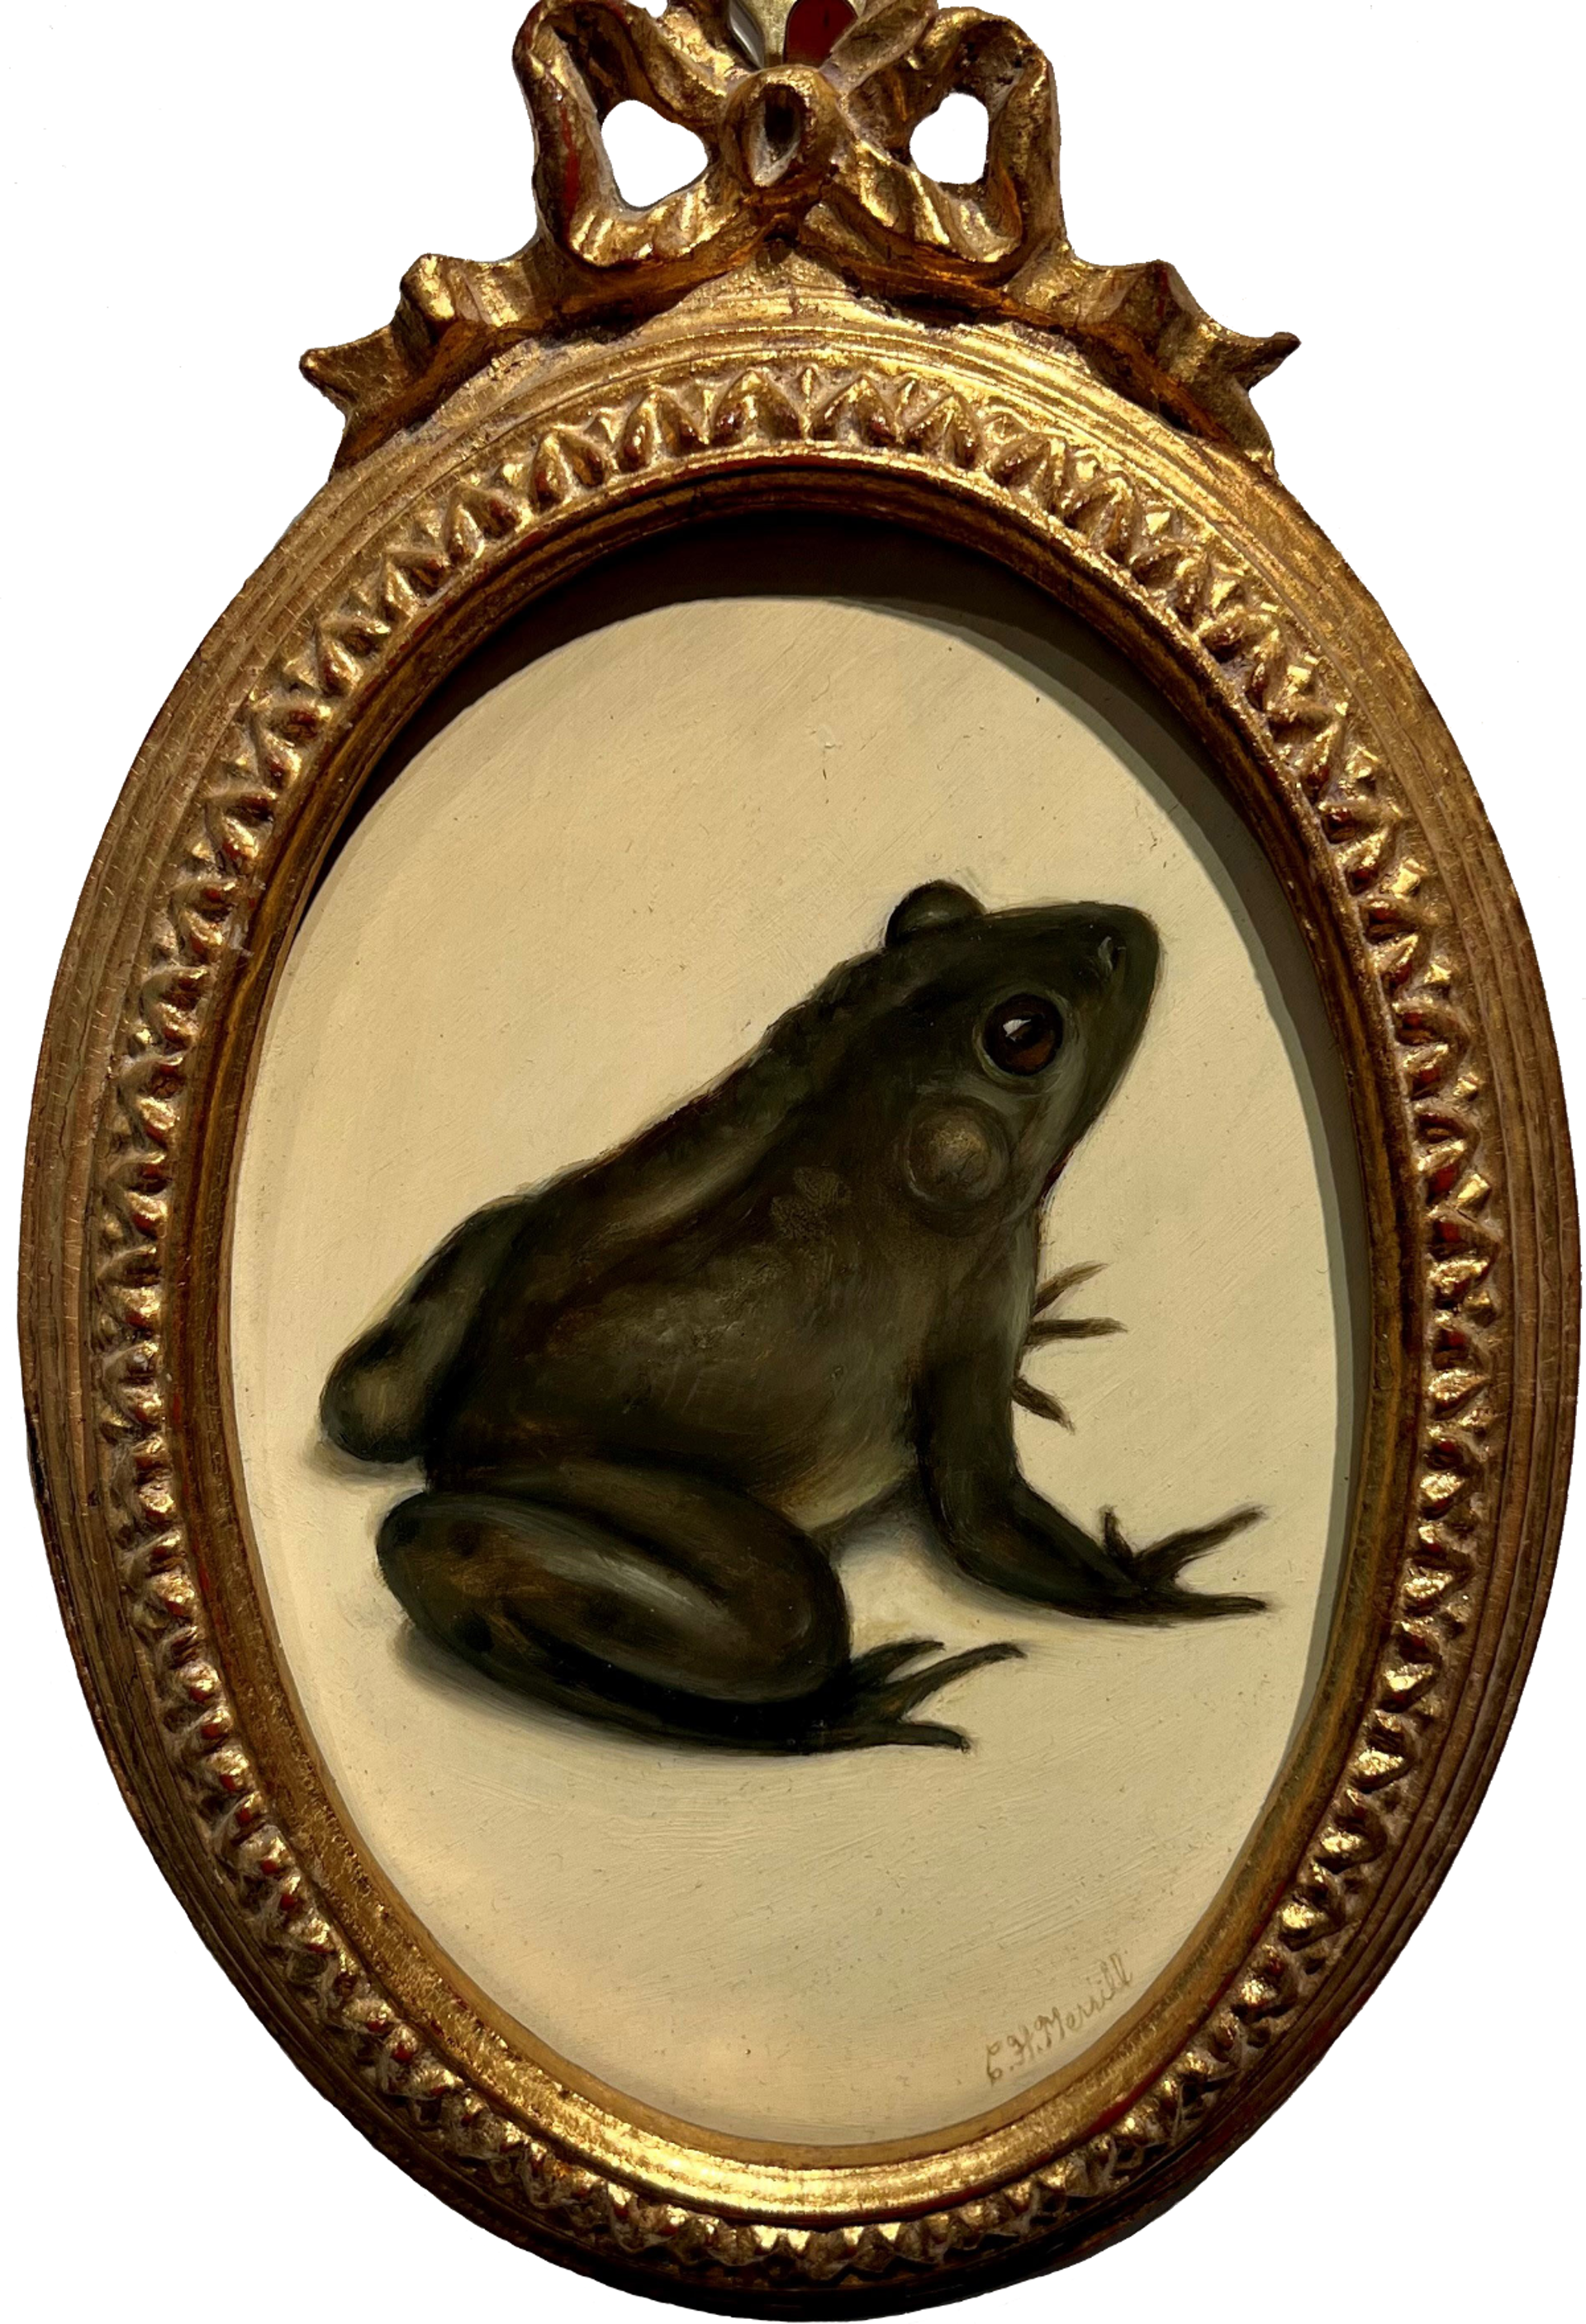 Frog by Christine Merrill